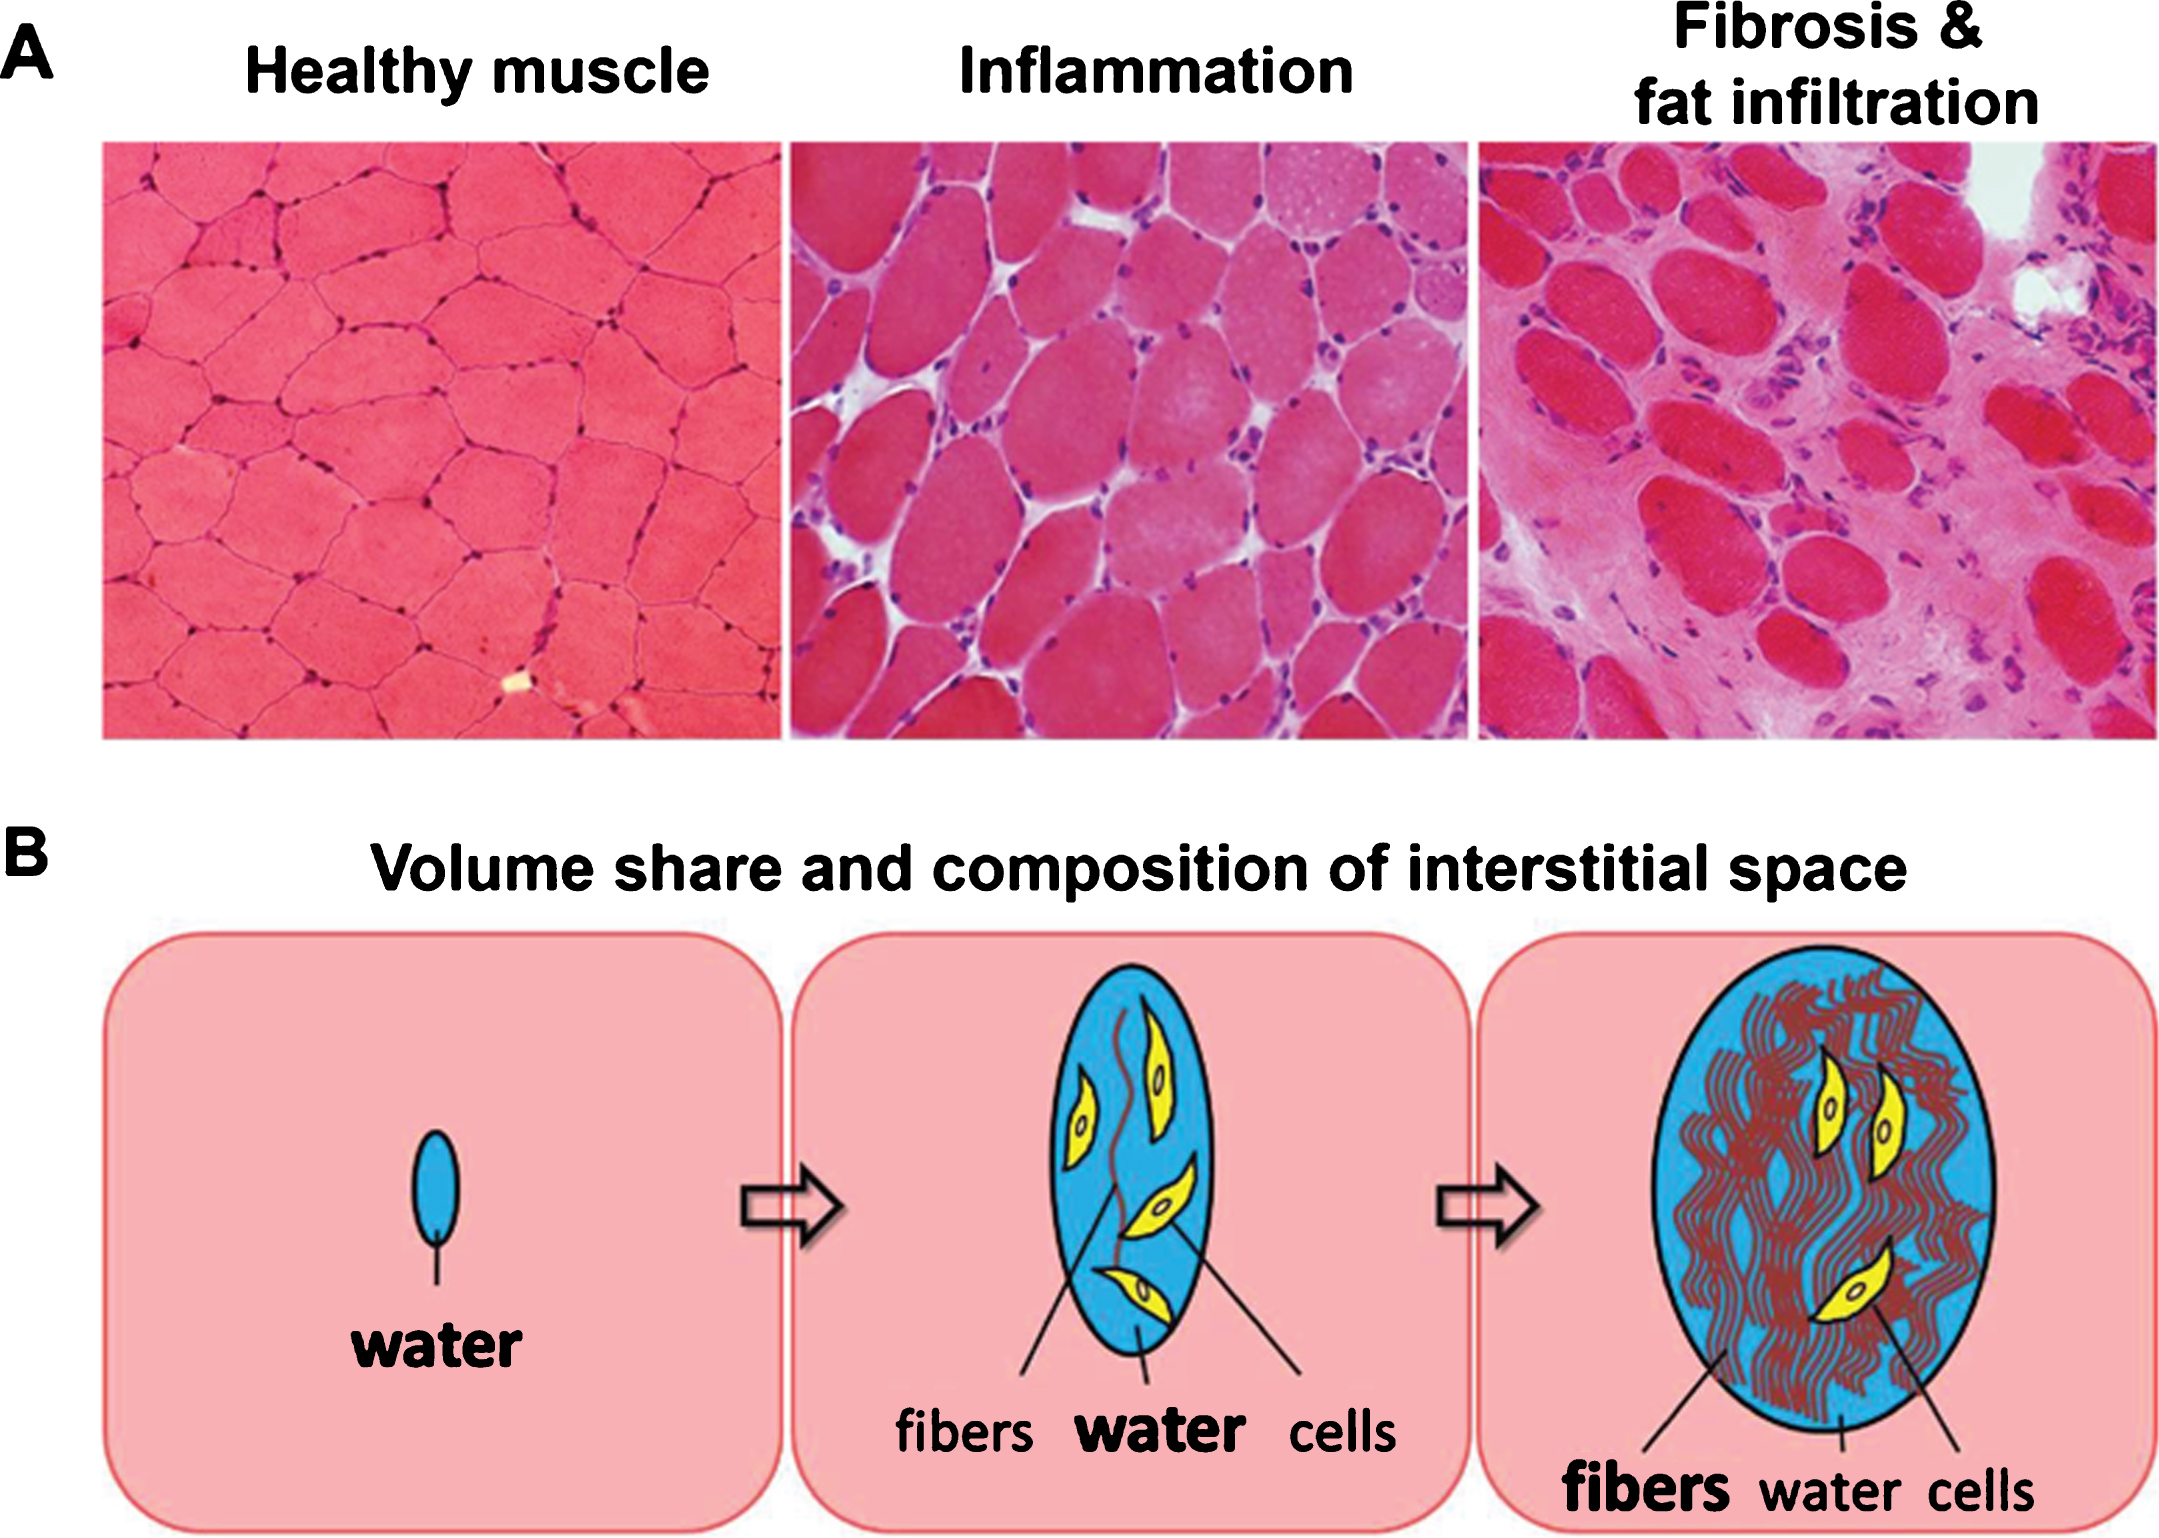 (A) Histological sections of healthy muscle, inflamed muscle, and heavily fat infiltrated and fibrotic muscle tissue. (B) Schematic of changes in volume share and composition of the interstitial space due to inflammation and as a consequence of fibrosis and fat infiltration.